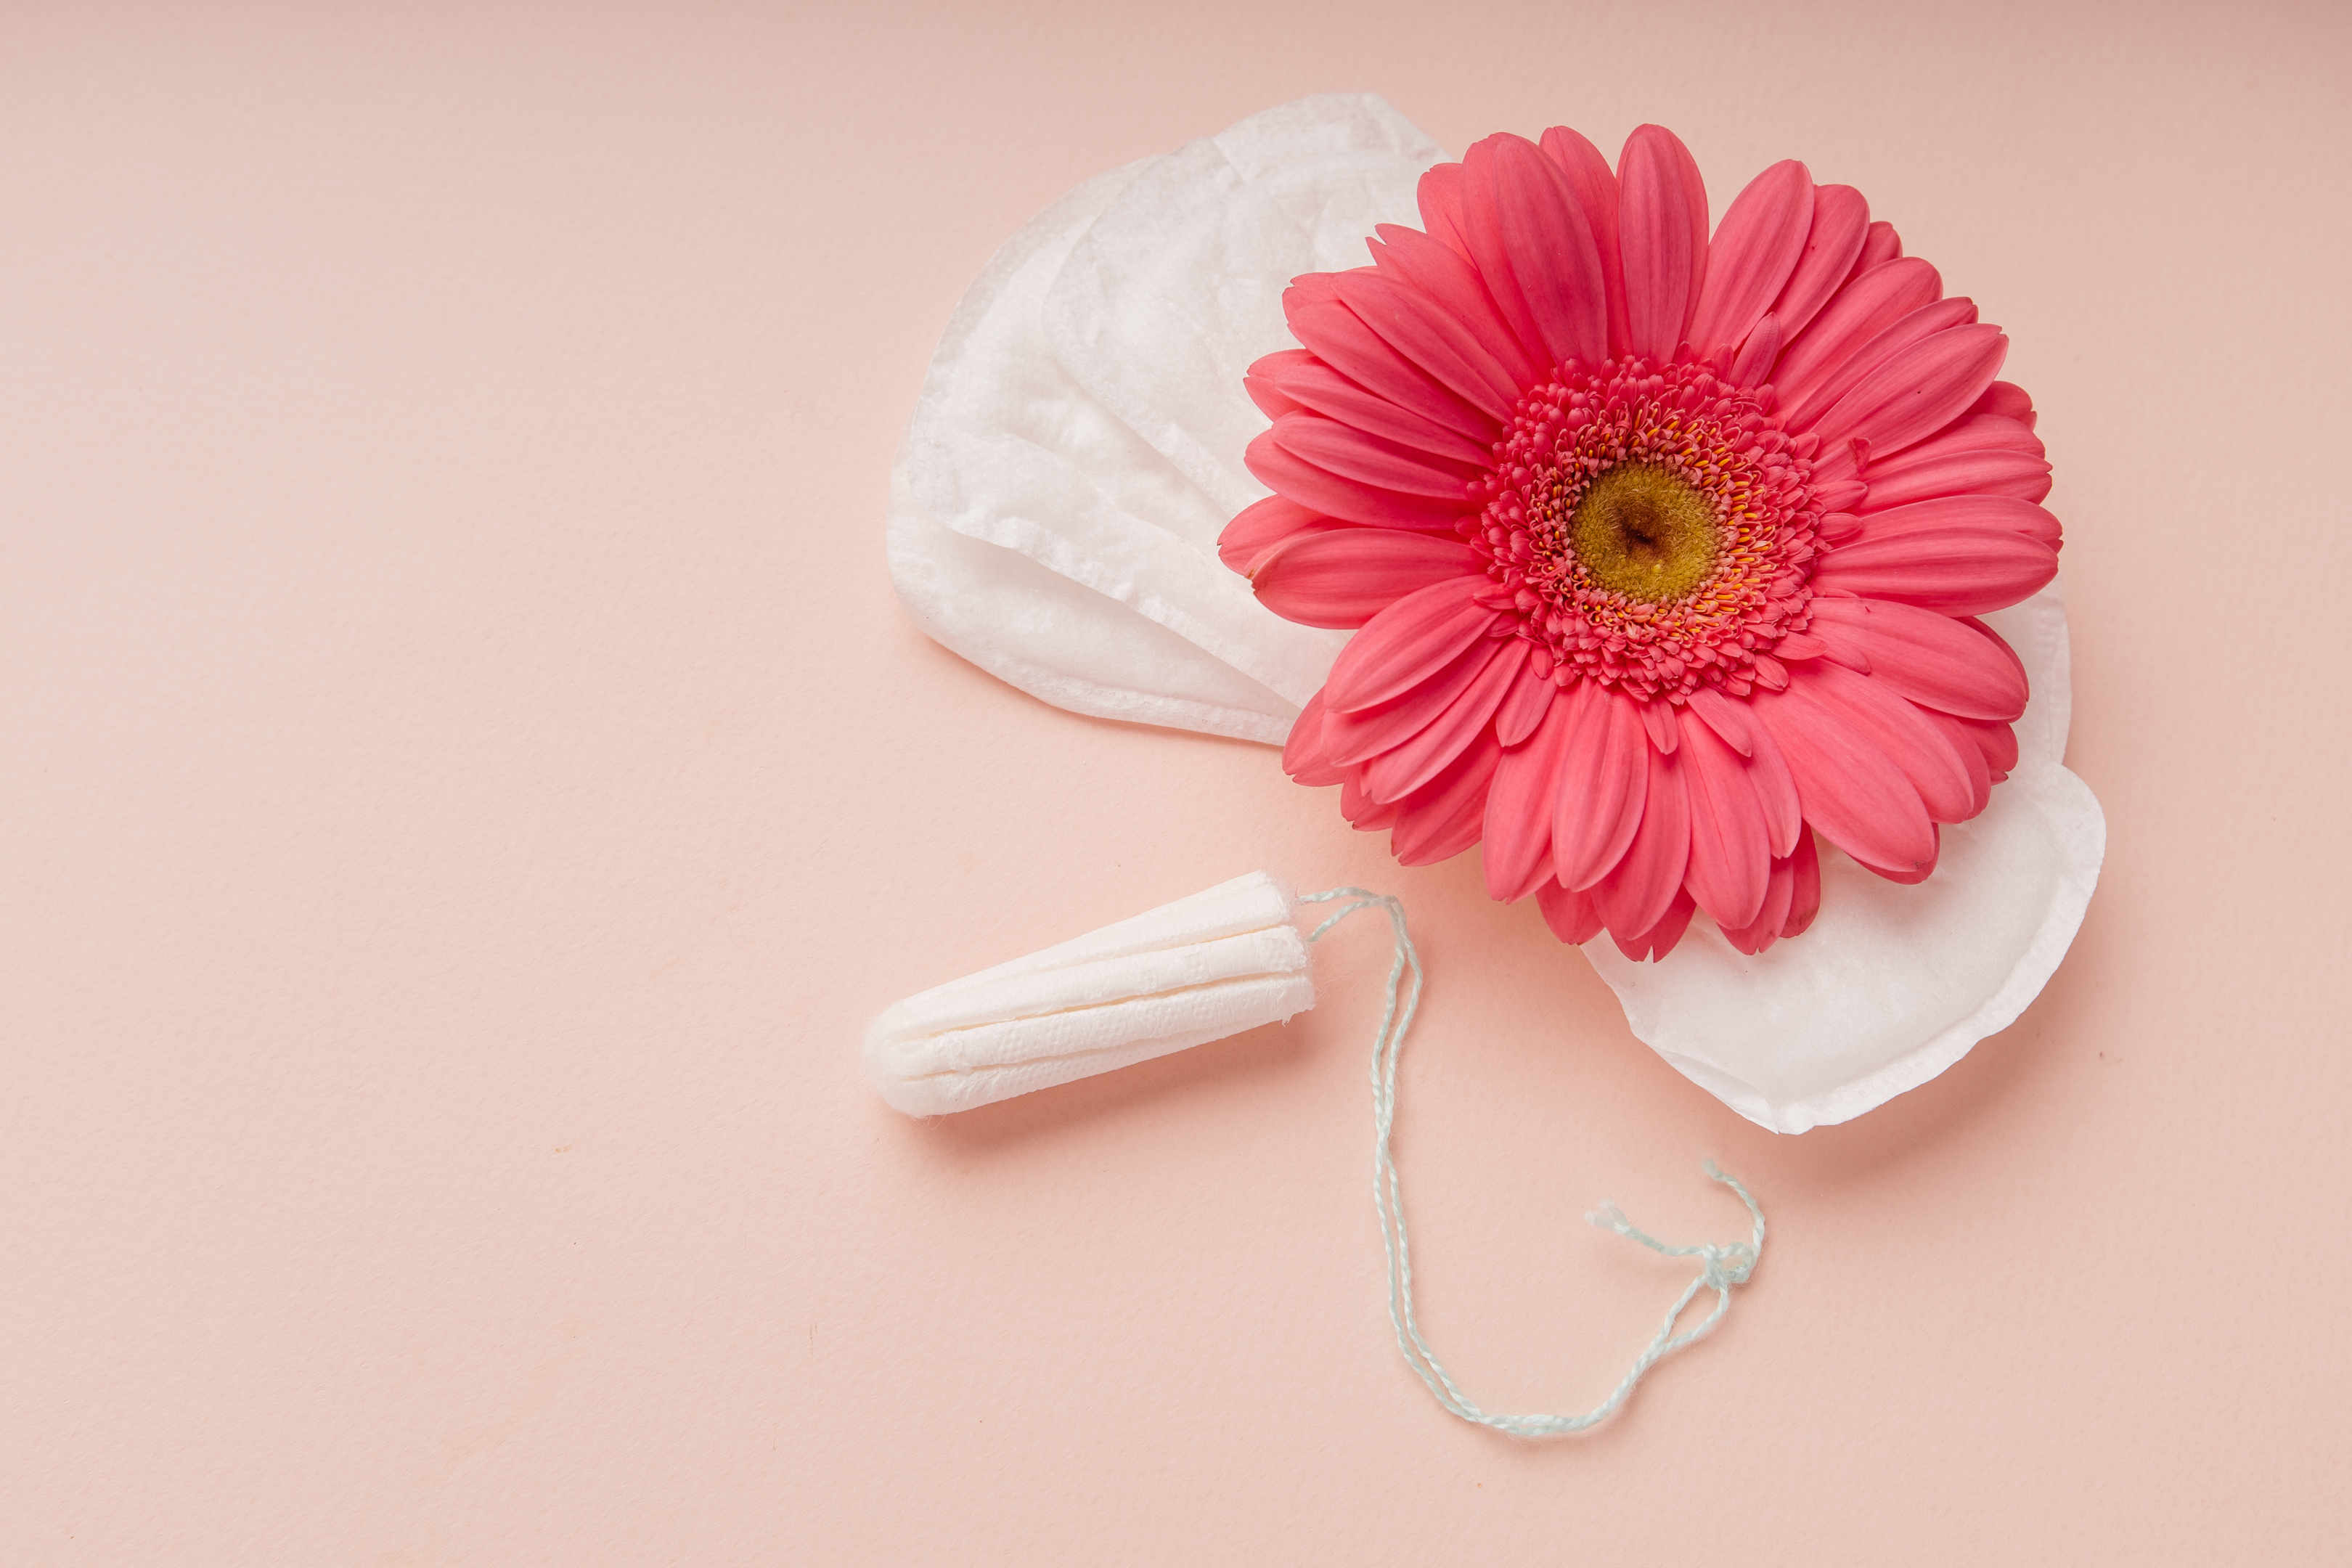 A properly inserted tampon can be a friendly replacement for pads.